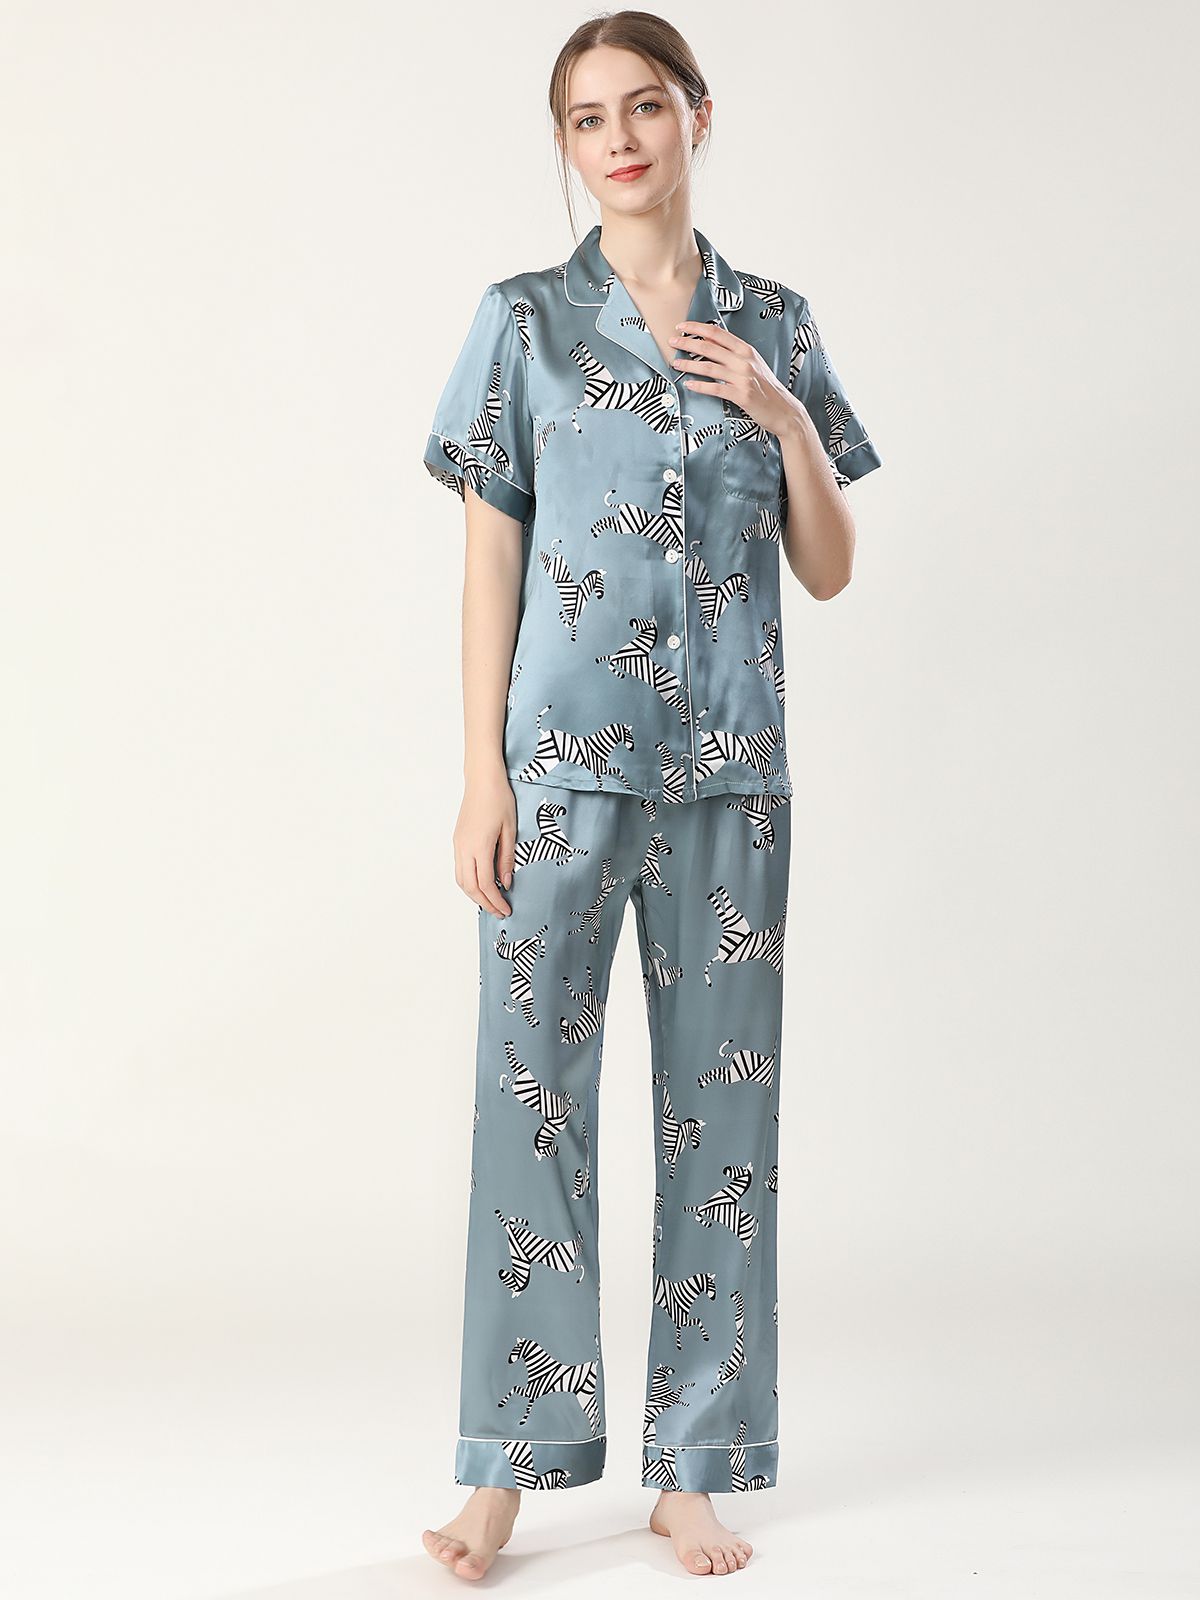 100% Pure Washable Affordable Mulberry Silk Pajama Sets for Women